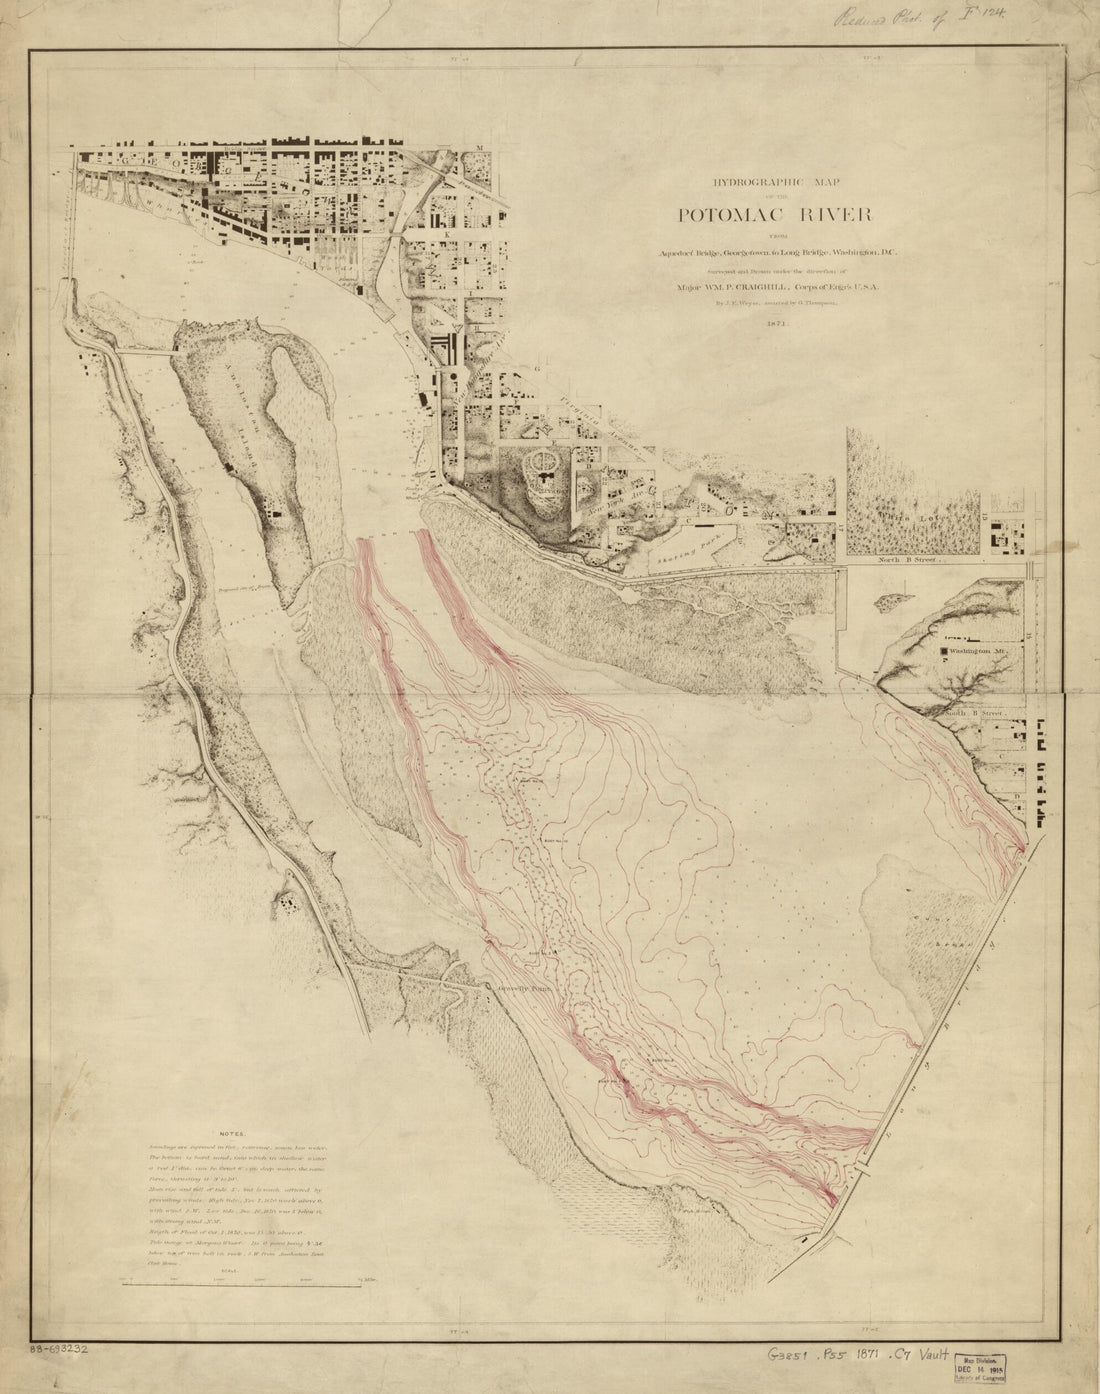 This old map of Hydrographic Map of the Potomac River from Aqueduct Bridge, Georgetown, to Long Bridge, Washington, D.C from 1871 was created by Wm. P. (William Price) Craighill, G. (Gilbert) Thompson,  United States. Army. Corps of Engineers, J. E. Weys